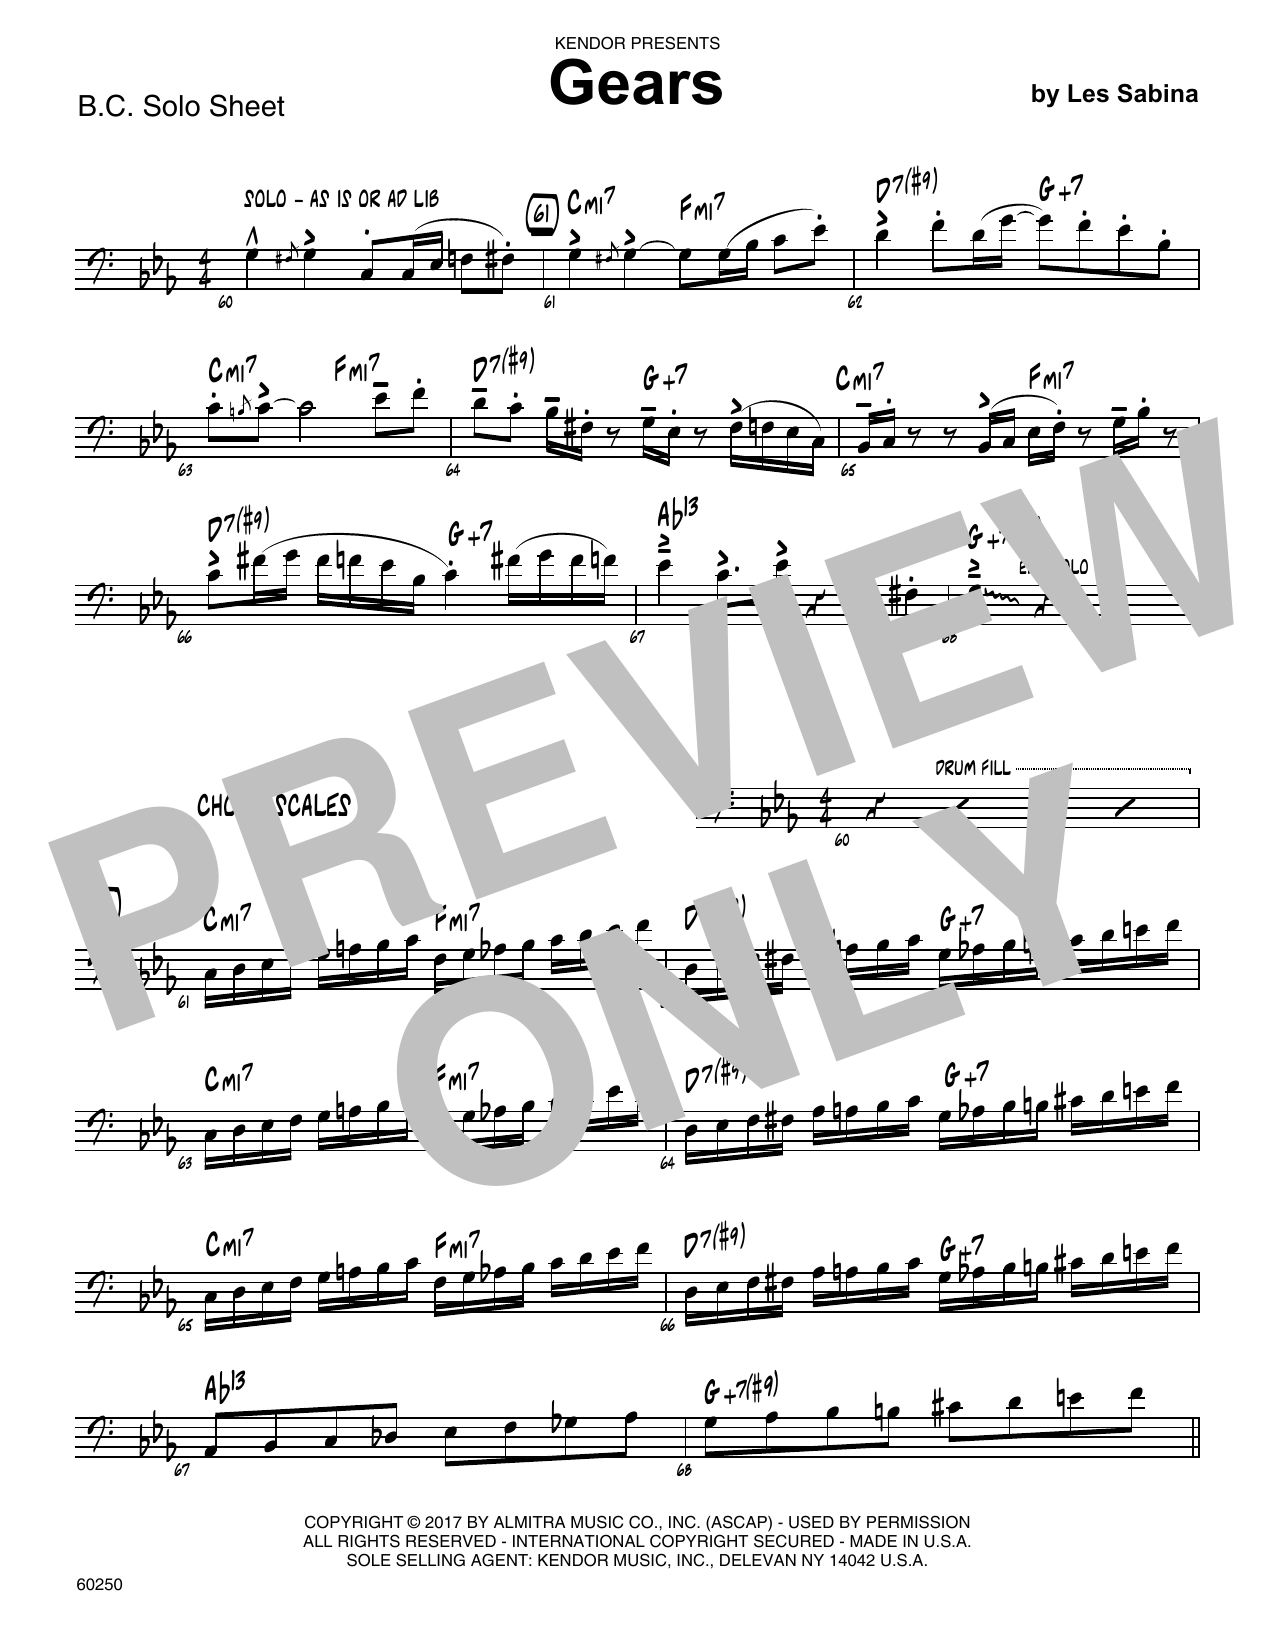 Download Les Sabina Gears - Sample Solo - Bass Clef Instr. Sheet Music